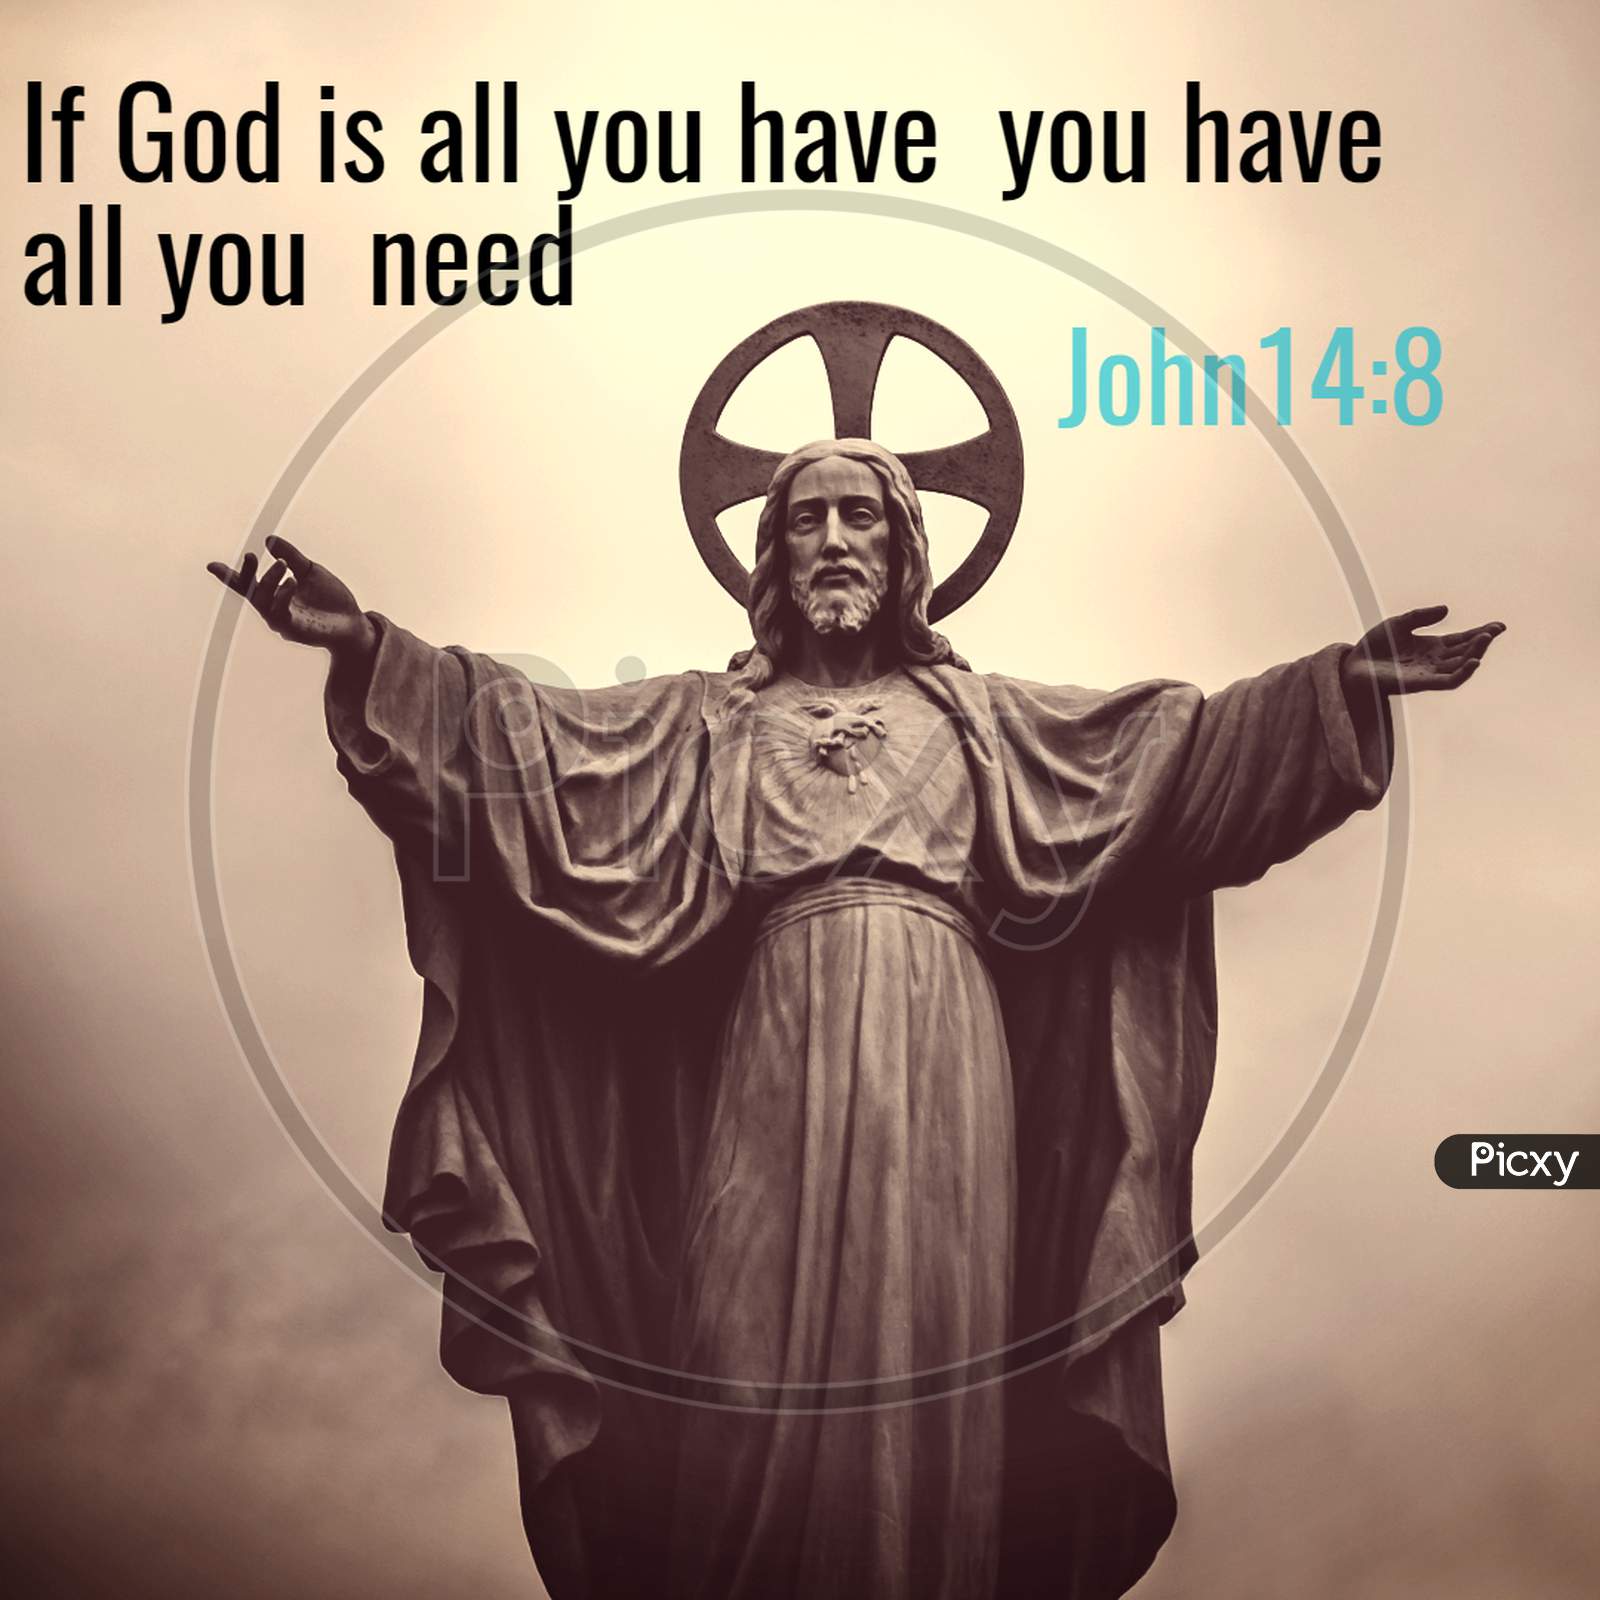 Bible Words " If god is all you have  all you need  John 14:8"